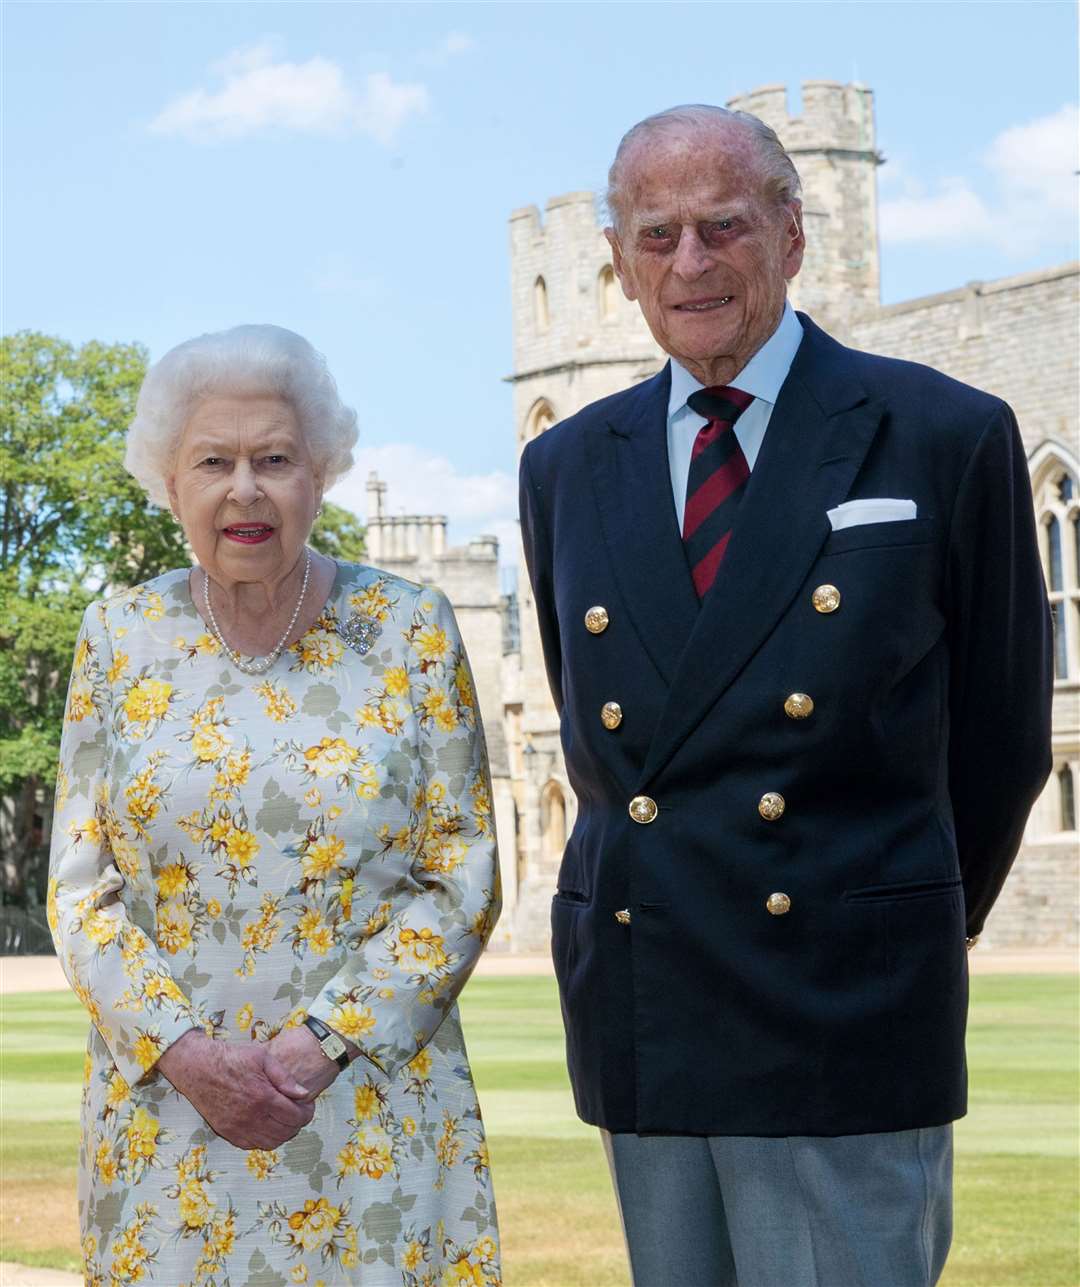 The Duke of Edinburgh and the Queen have been spending the latest lockdown at Windsor Castle (Steve Parsons/PA)